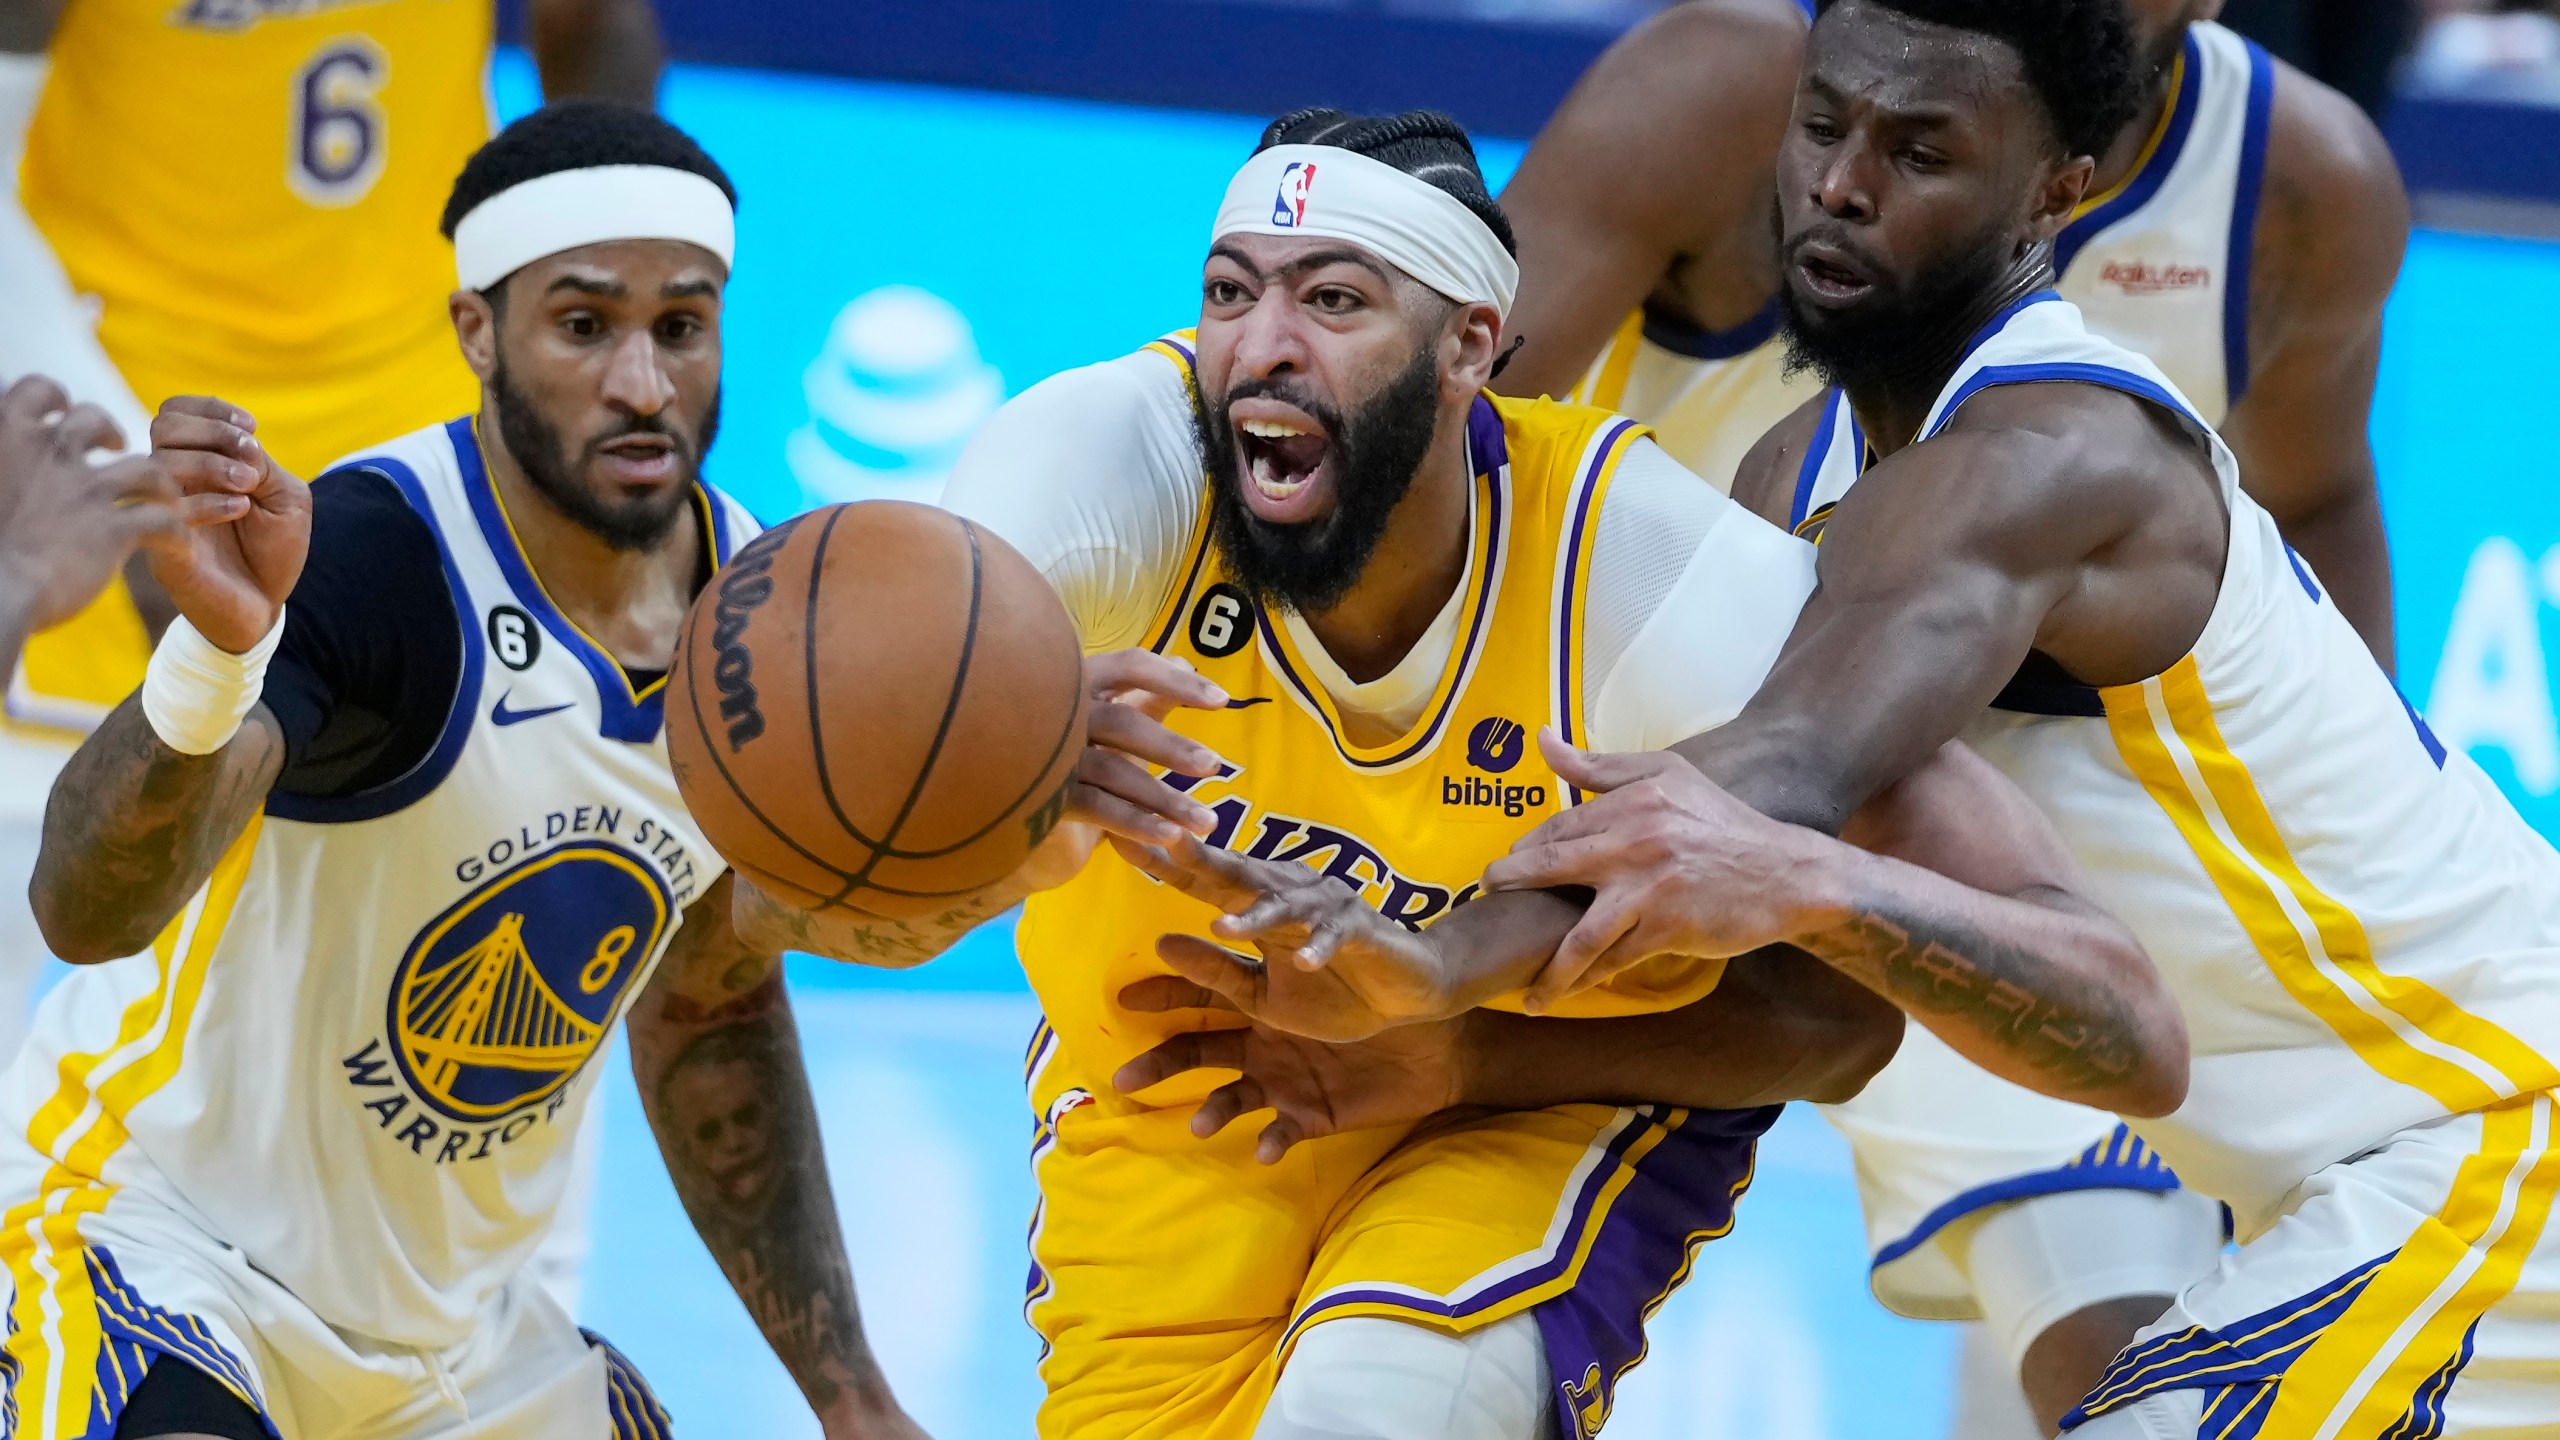 Los Angeles Lakers forward Anthony Davis, middle, reaches for the ball between Golden State Warriors guard Gary Payton II (8) and forward Andrew Wiggins during the first half of Game 5 of an NBA basketball second-round playoff series Wednesday, May 10, 2023, in San Francisco. (AP Photo/Godofredo A. Vásquez)